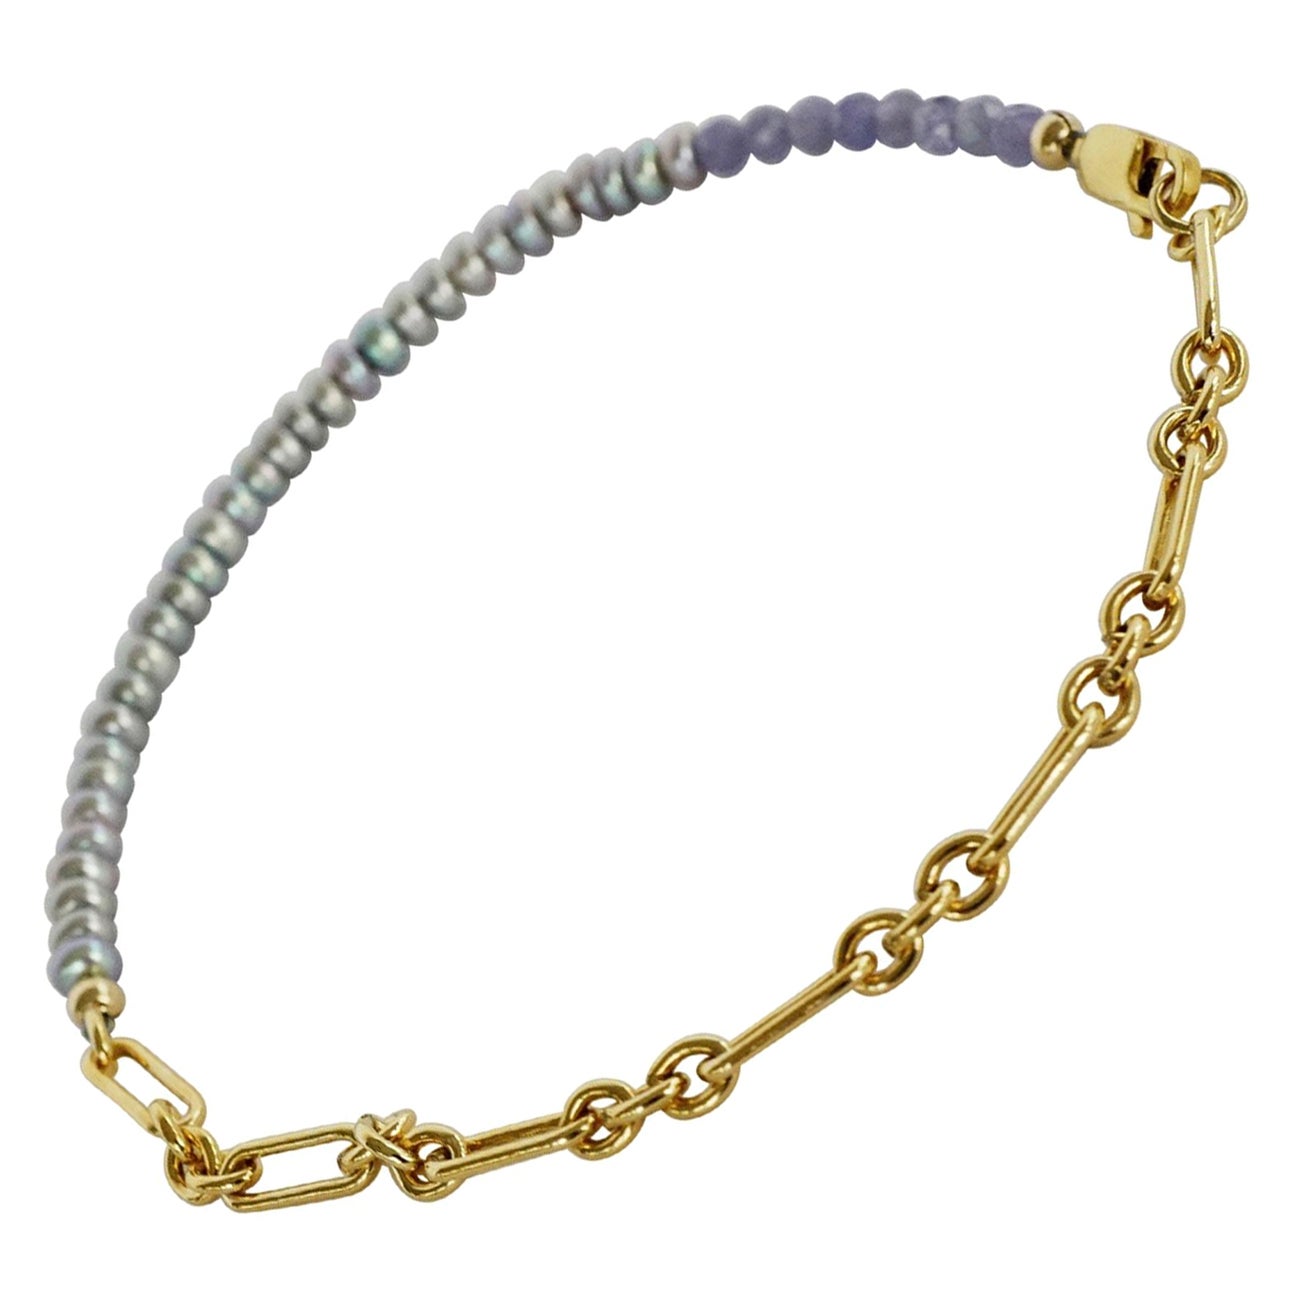 Pearl Tanzanite Ankle Bracelet Beaded Gold Filled Chain J Dauphin
can also be used as a bracelet as chain is adjustable

